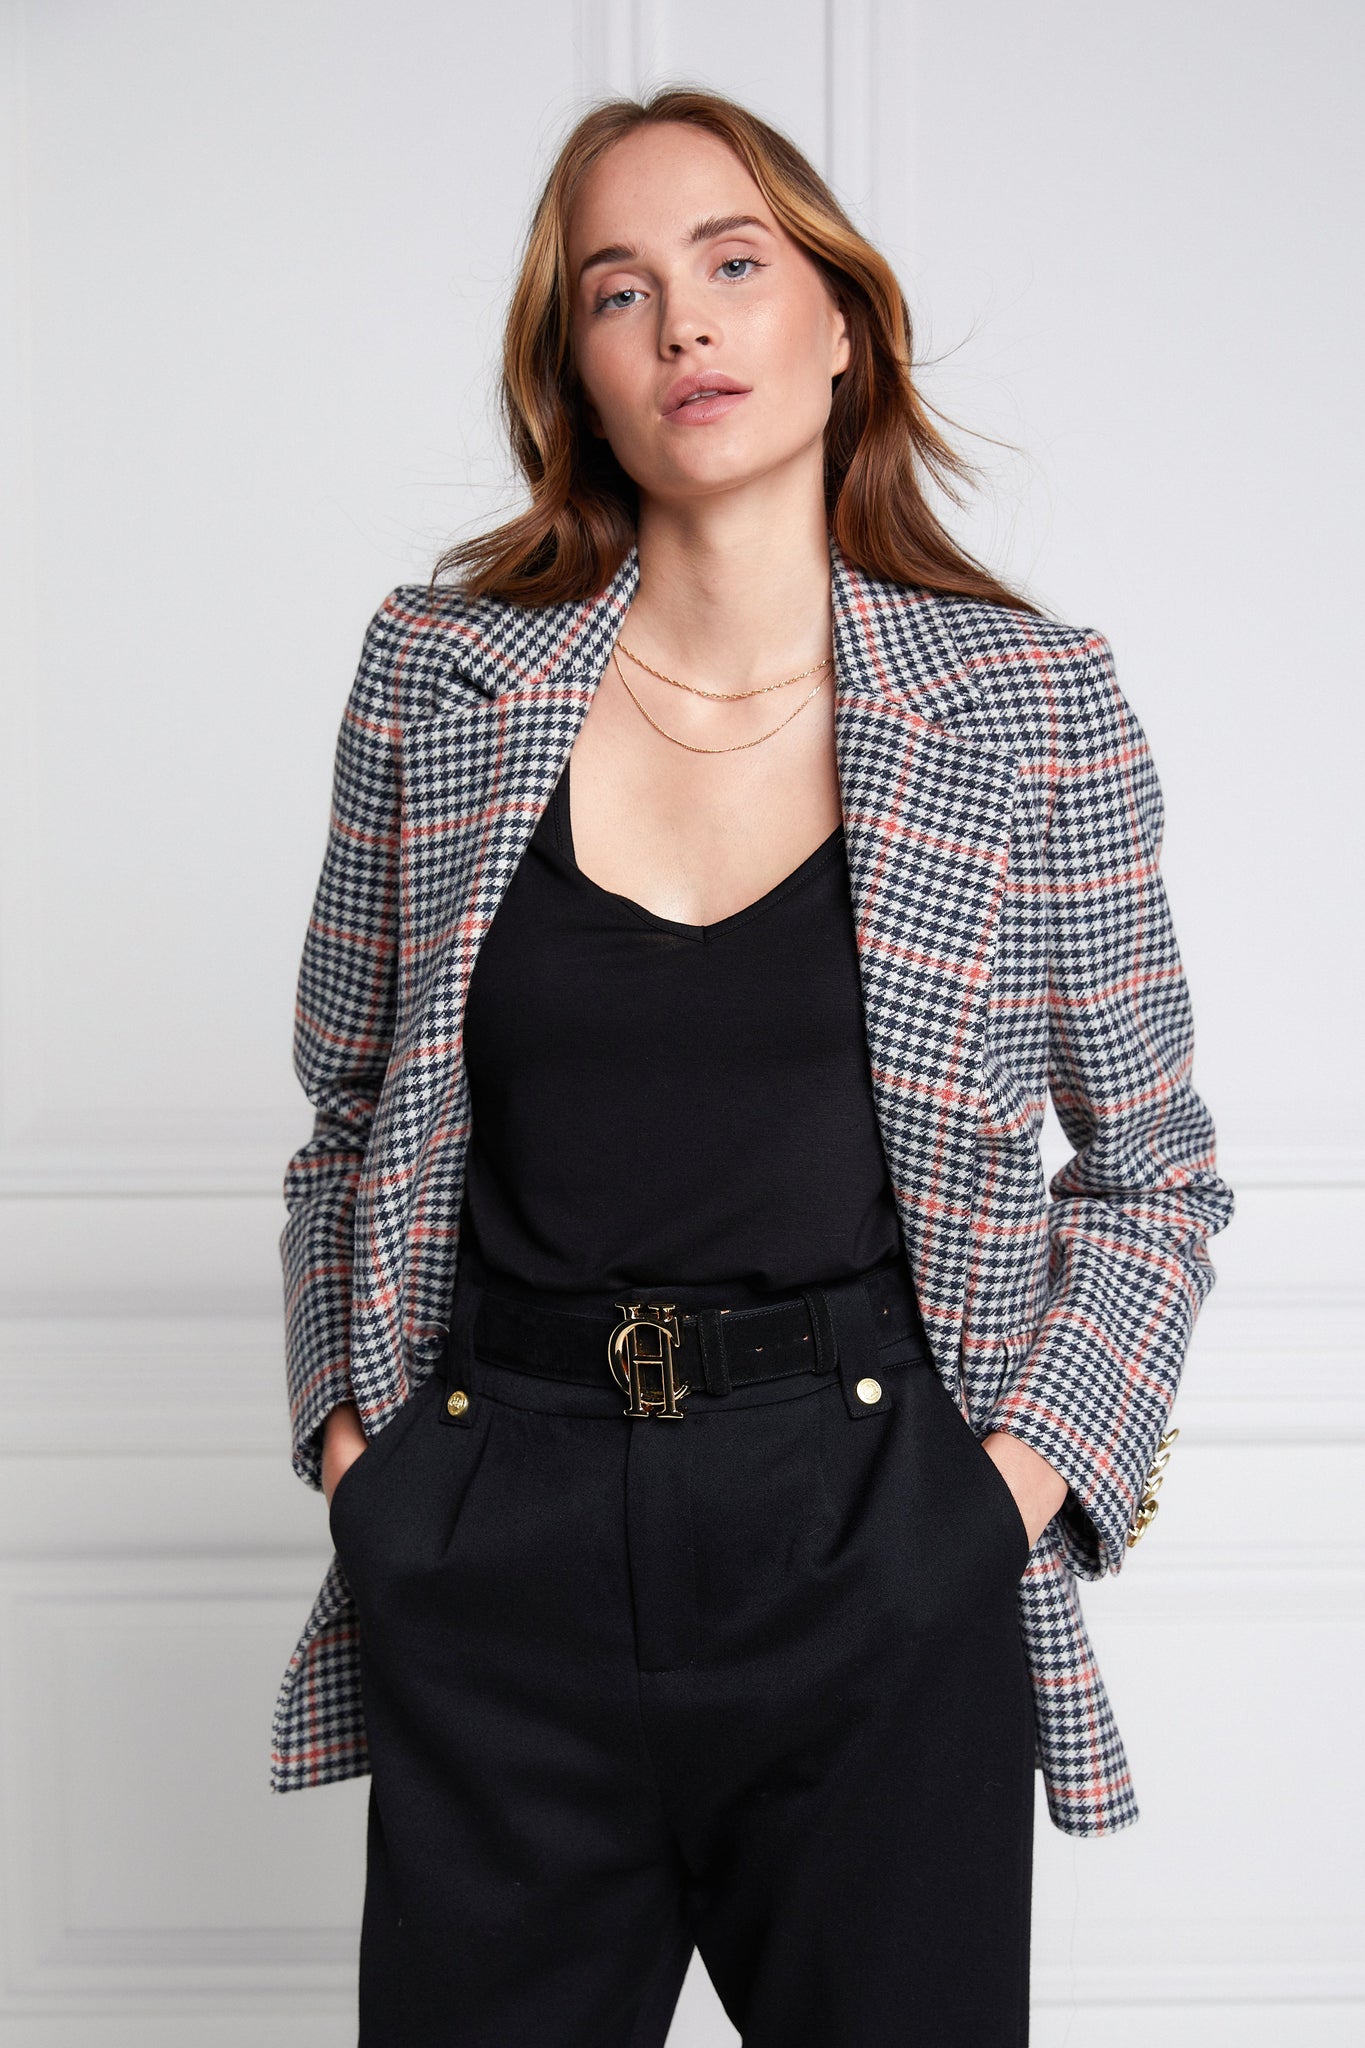 double breasted wool blazer in black white and pink check with two hip pockets and gold button details down front and on cuffs and handmade in the uk worn with black tee and black tailored trousers